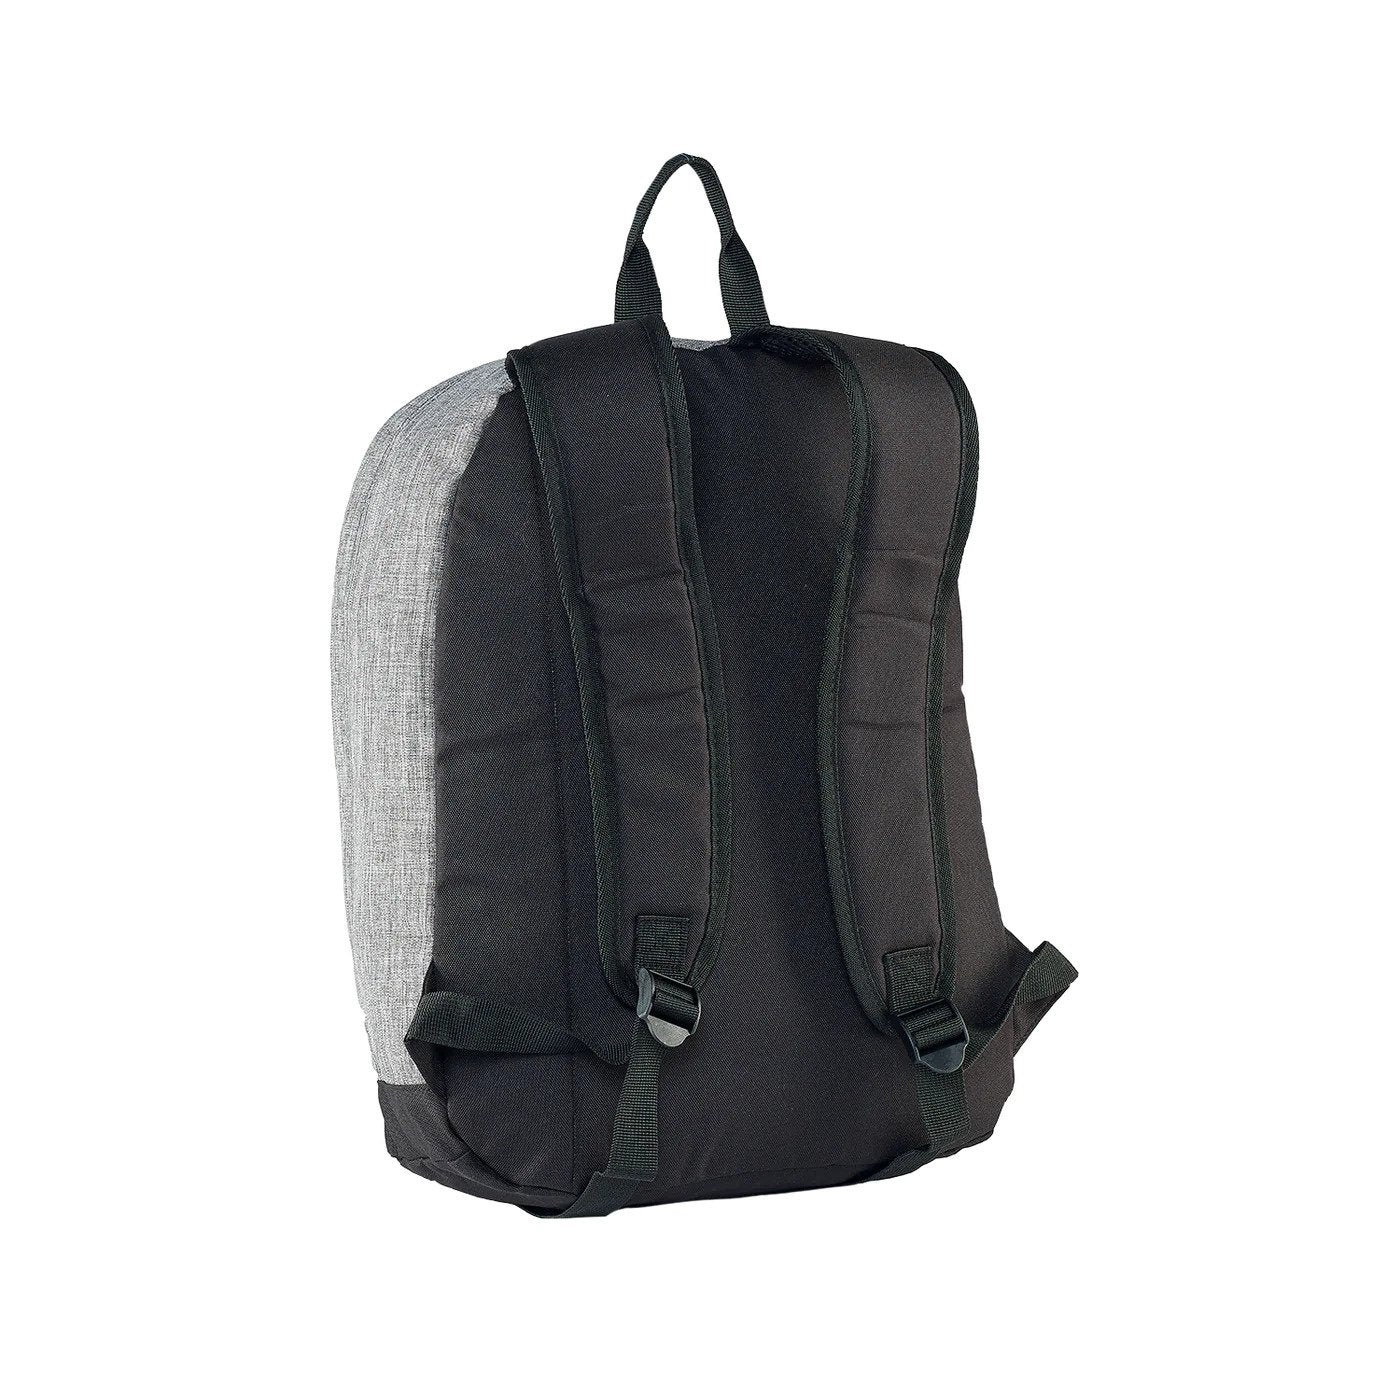 CAMPUS 22L BACKPACK